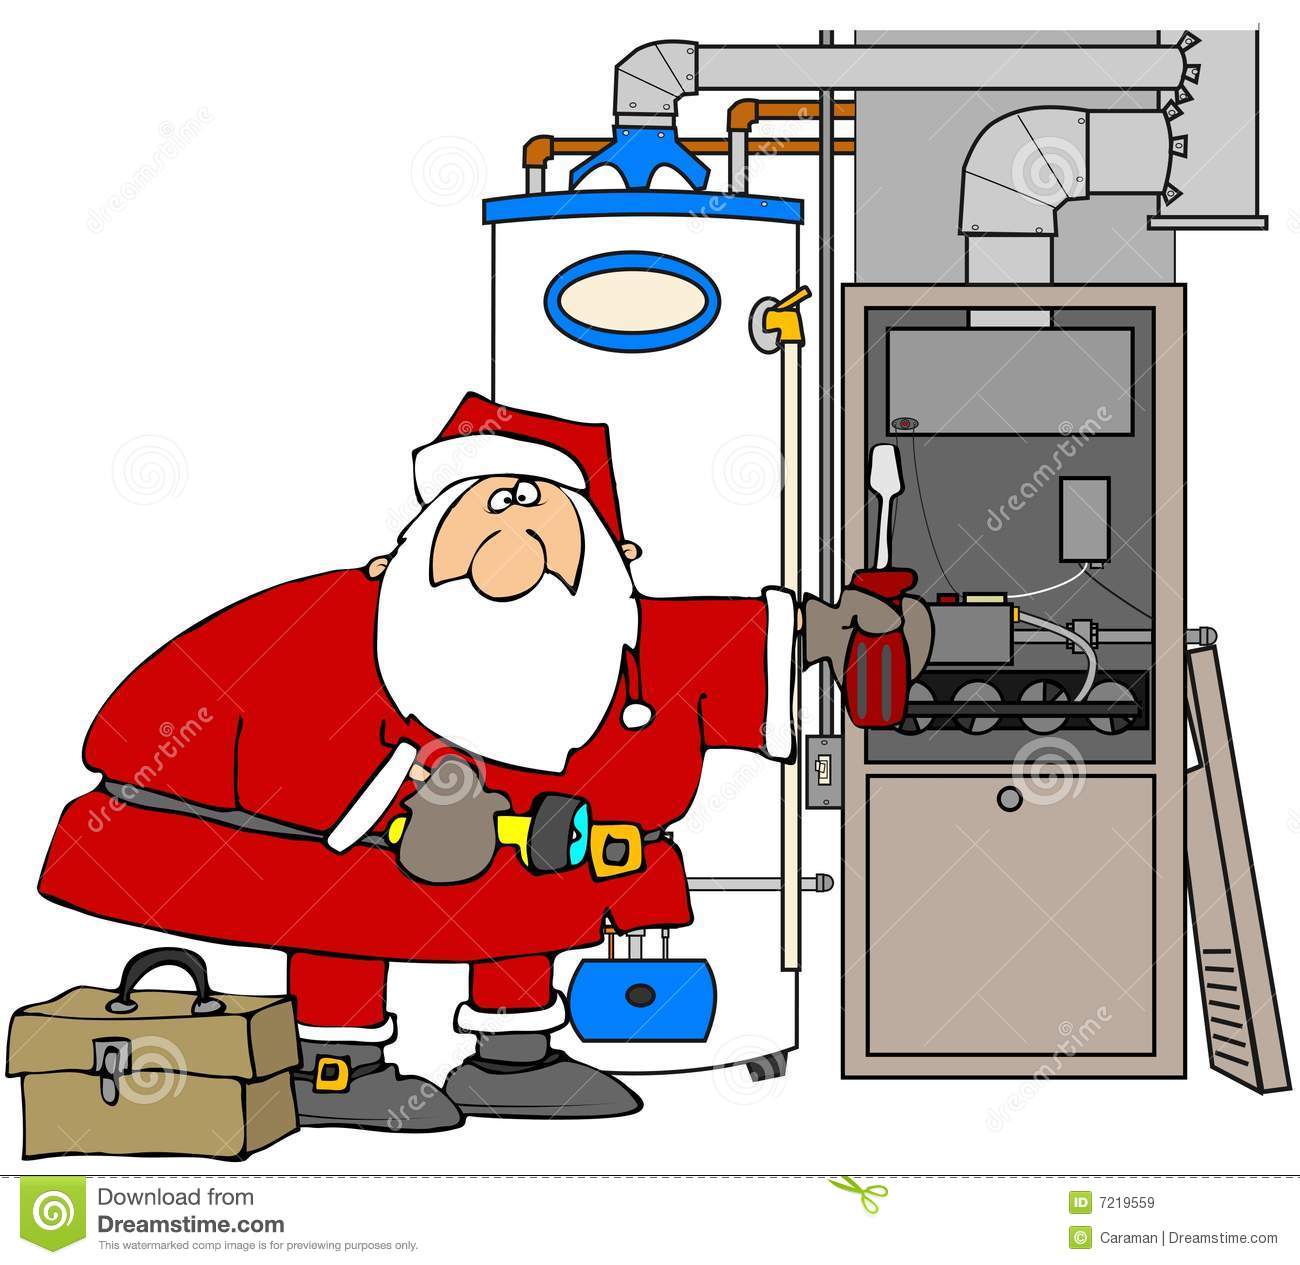 Santa Fixing A Furnace Royalty Free Stock Images   Image  7219559